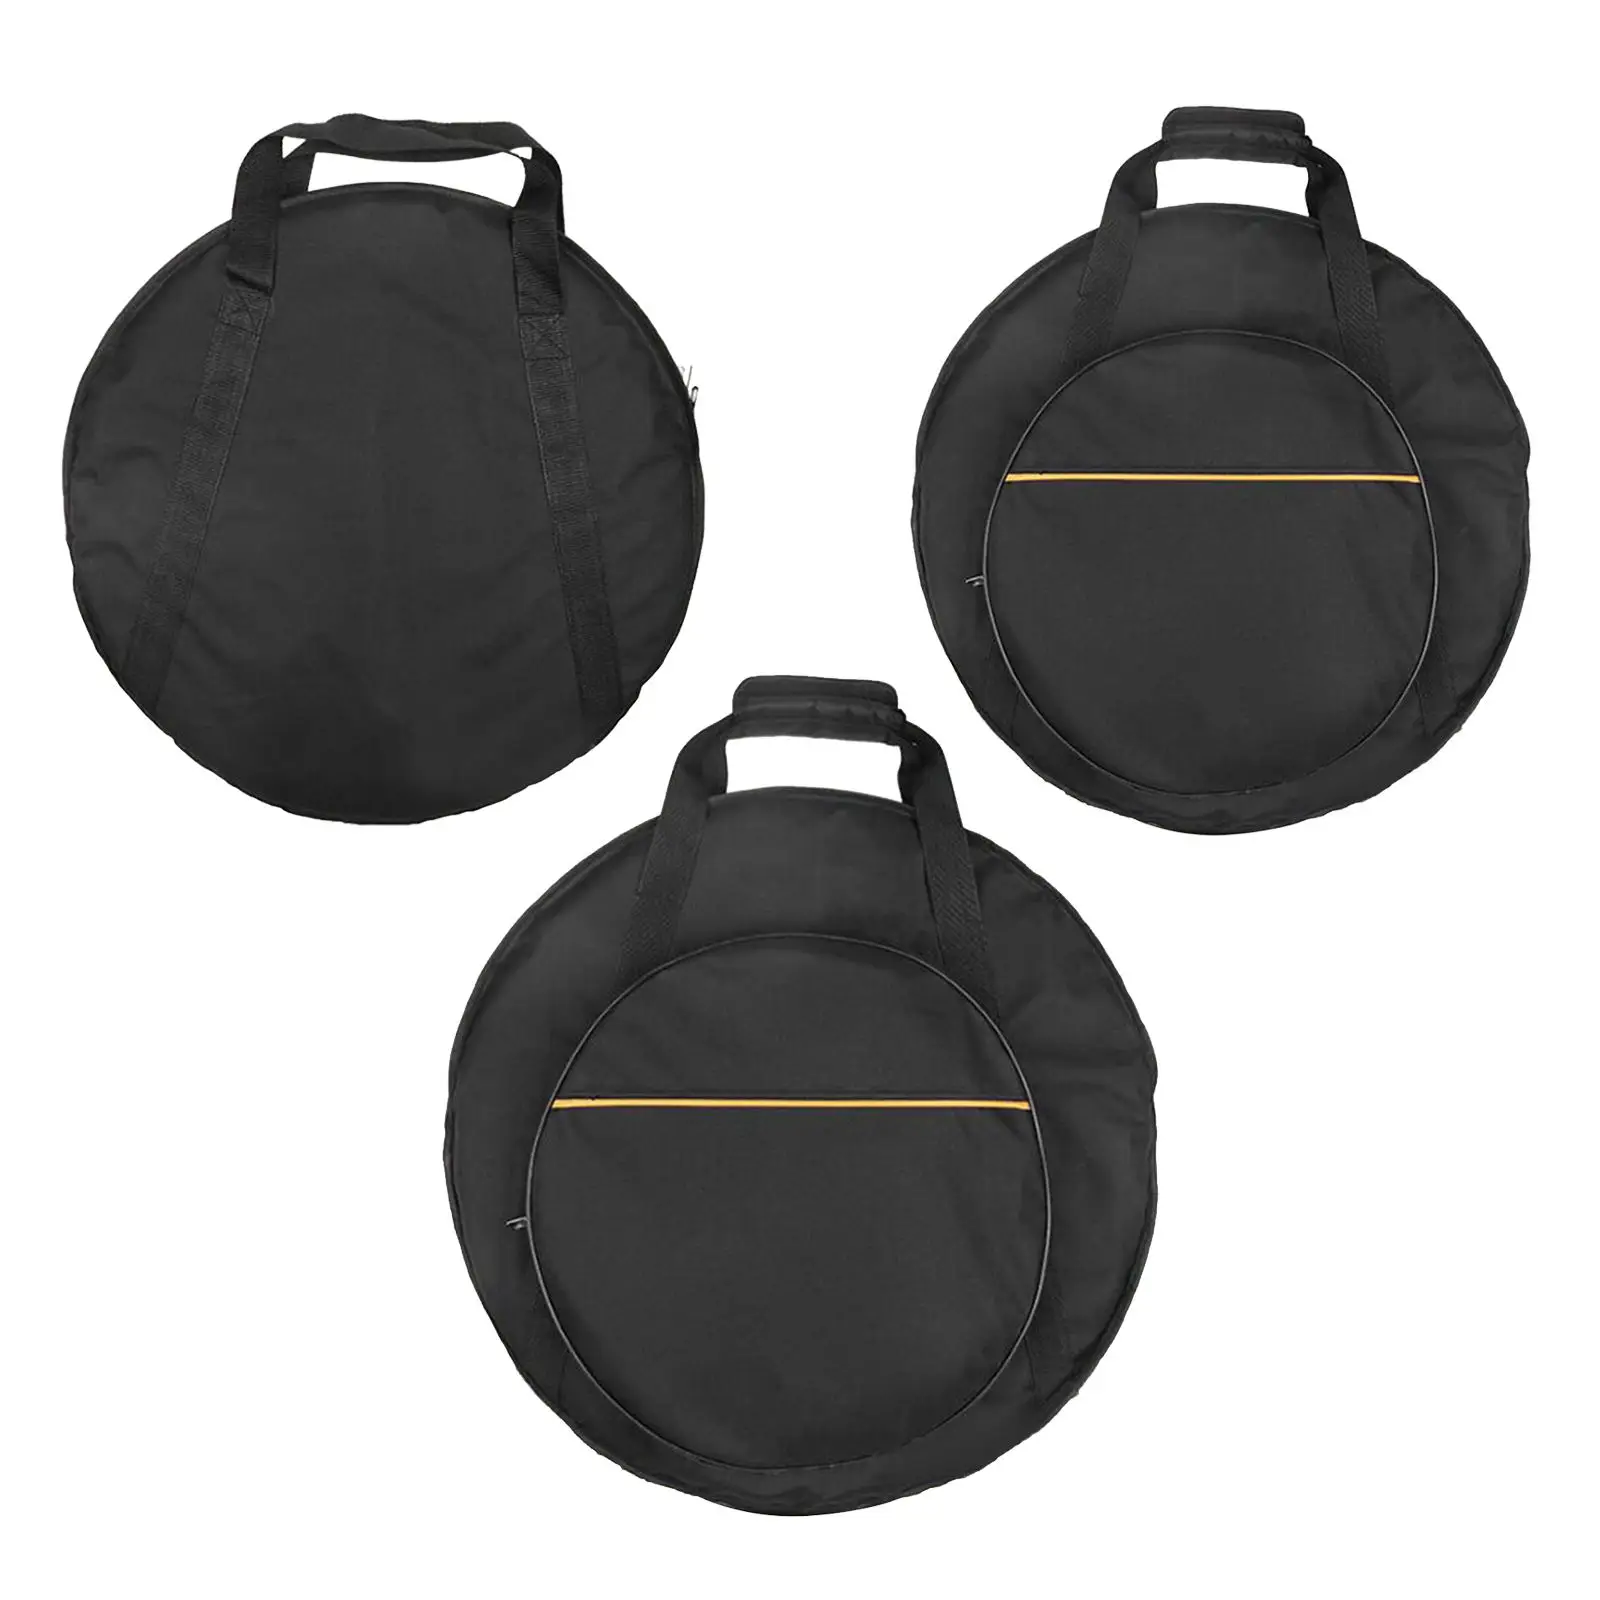 1PC Cymbal Storage Bag Percussion Instrument Accessories Black Cymbal Carrying Case Waterproof with Padded Dividers